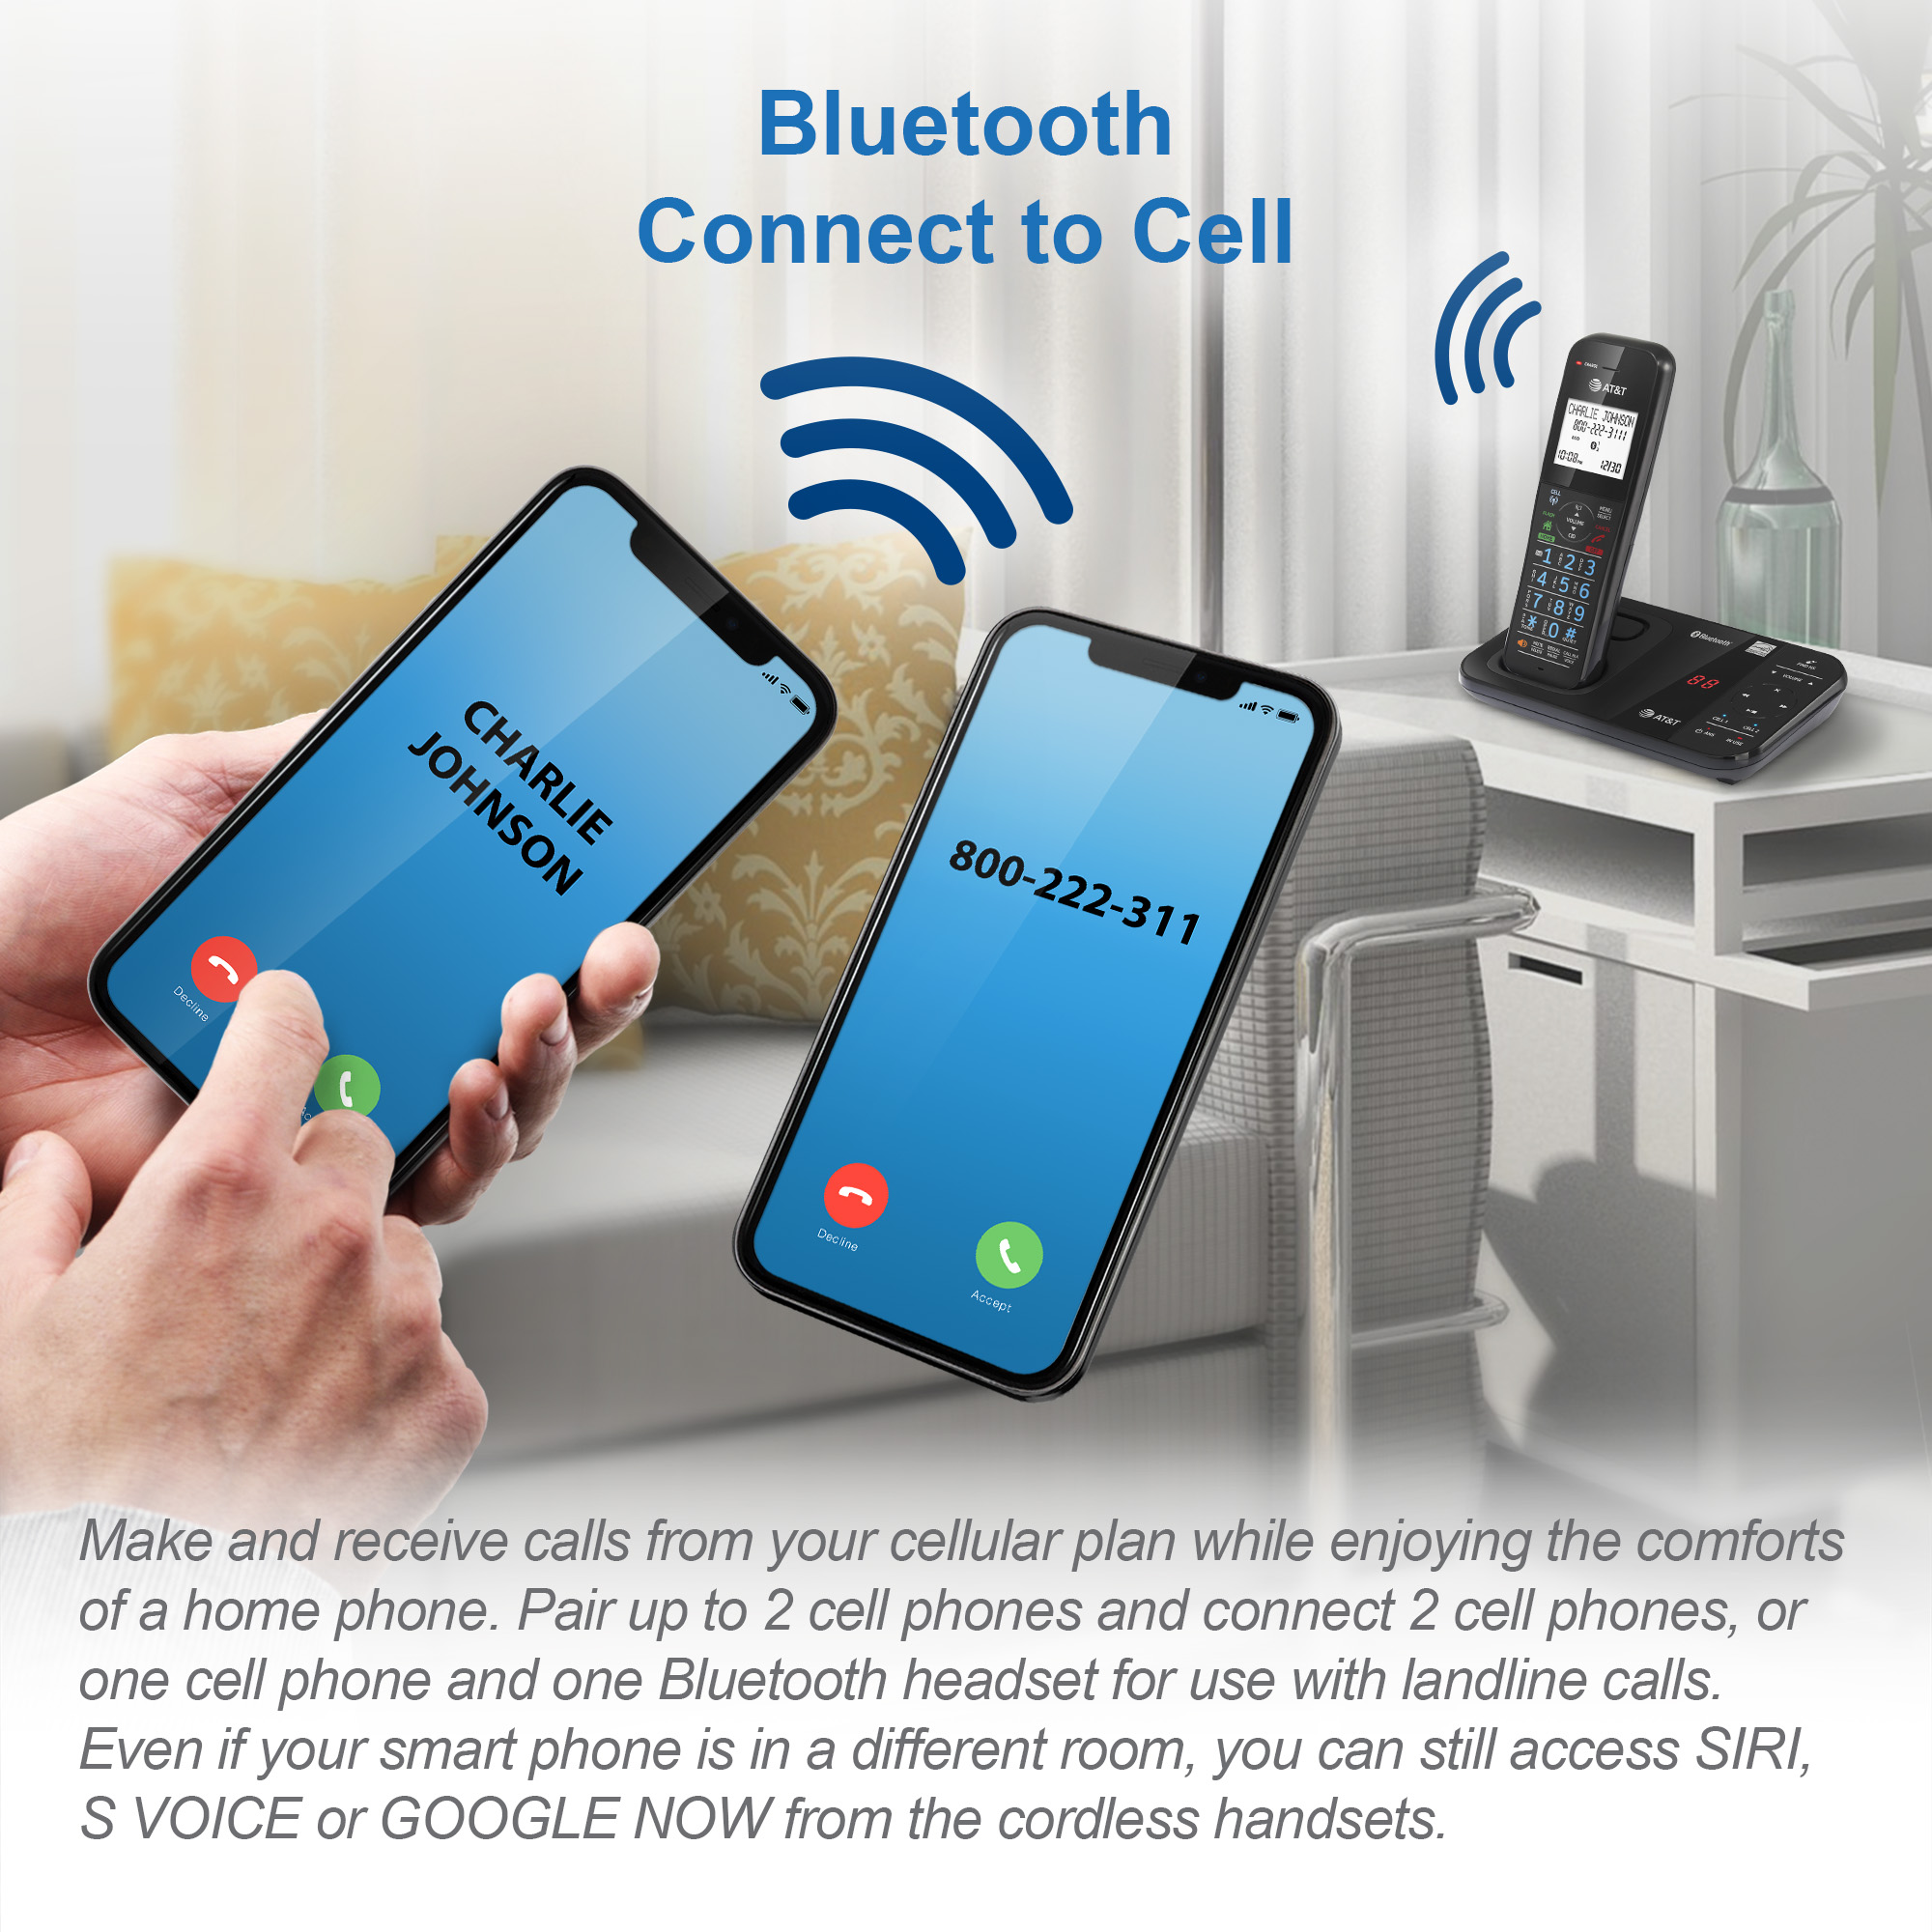 3-Handset Expandable Antibacterial Plastic Cordless Phone with Bluetooth Connect to Cell, Smart Call Blocker and Answering System - view 11